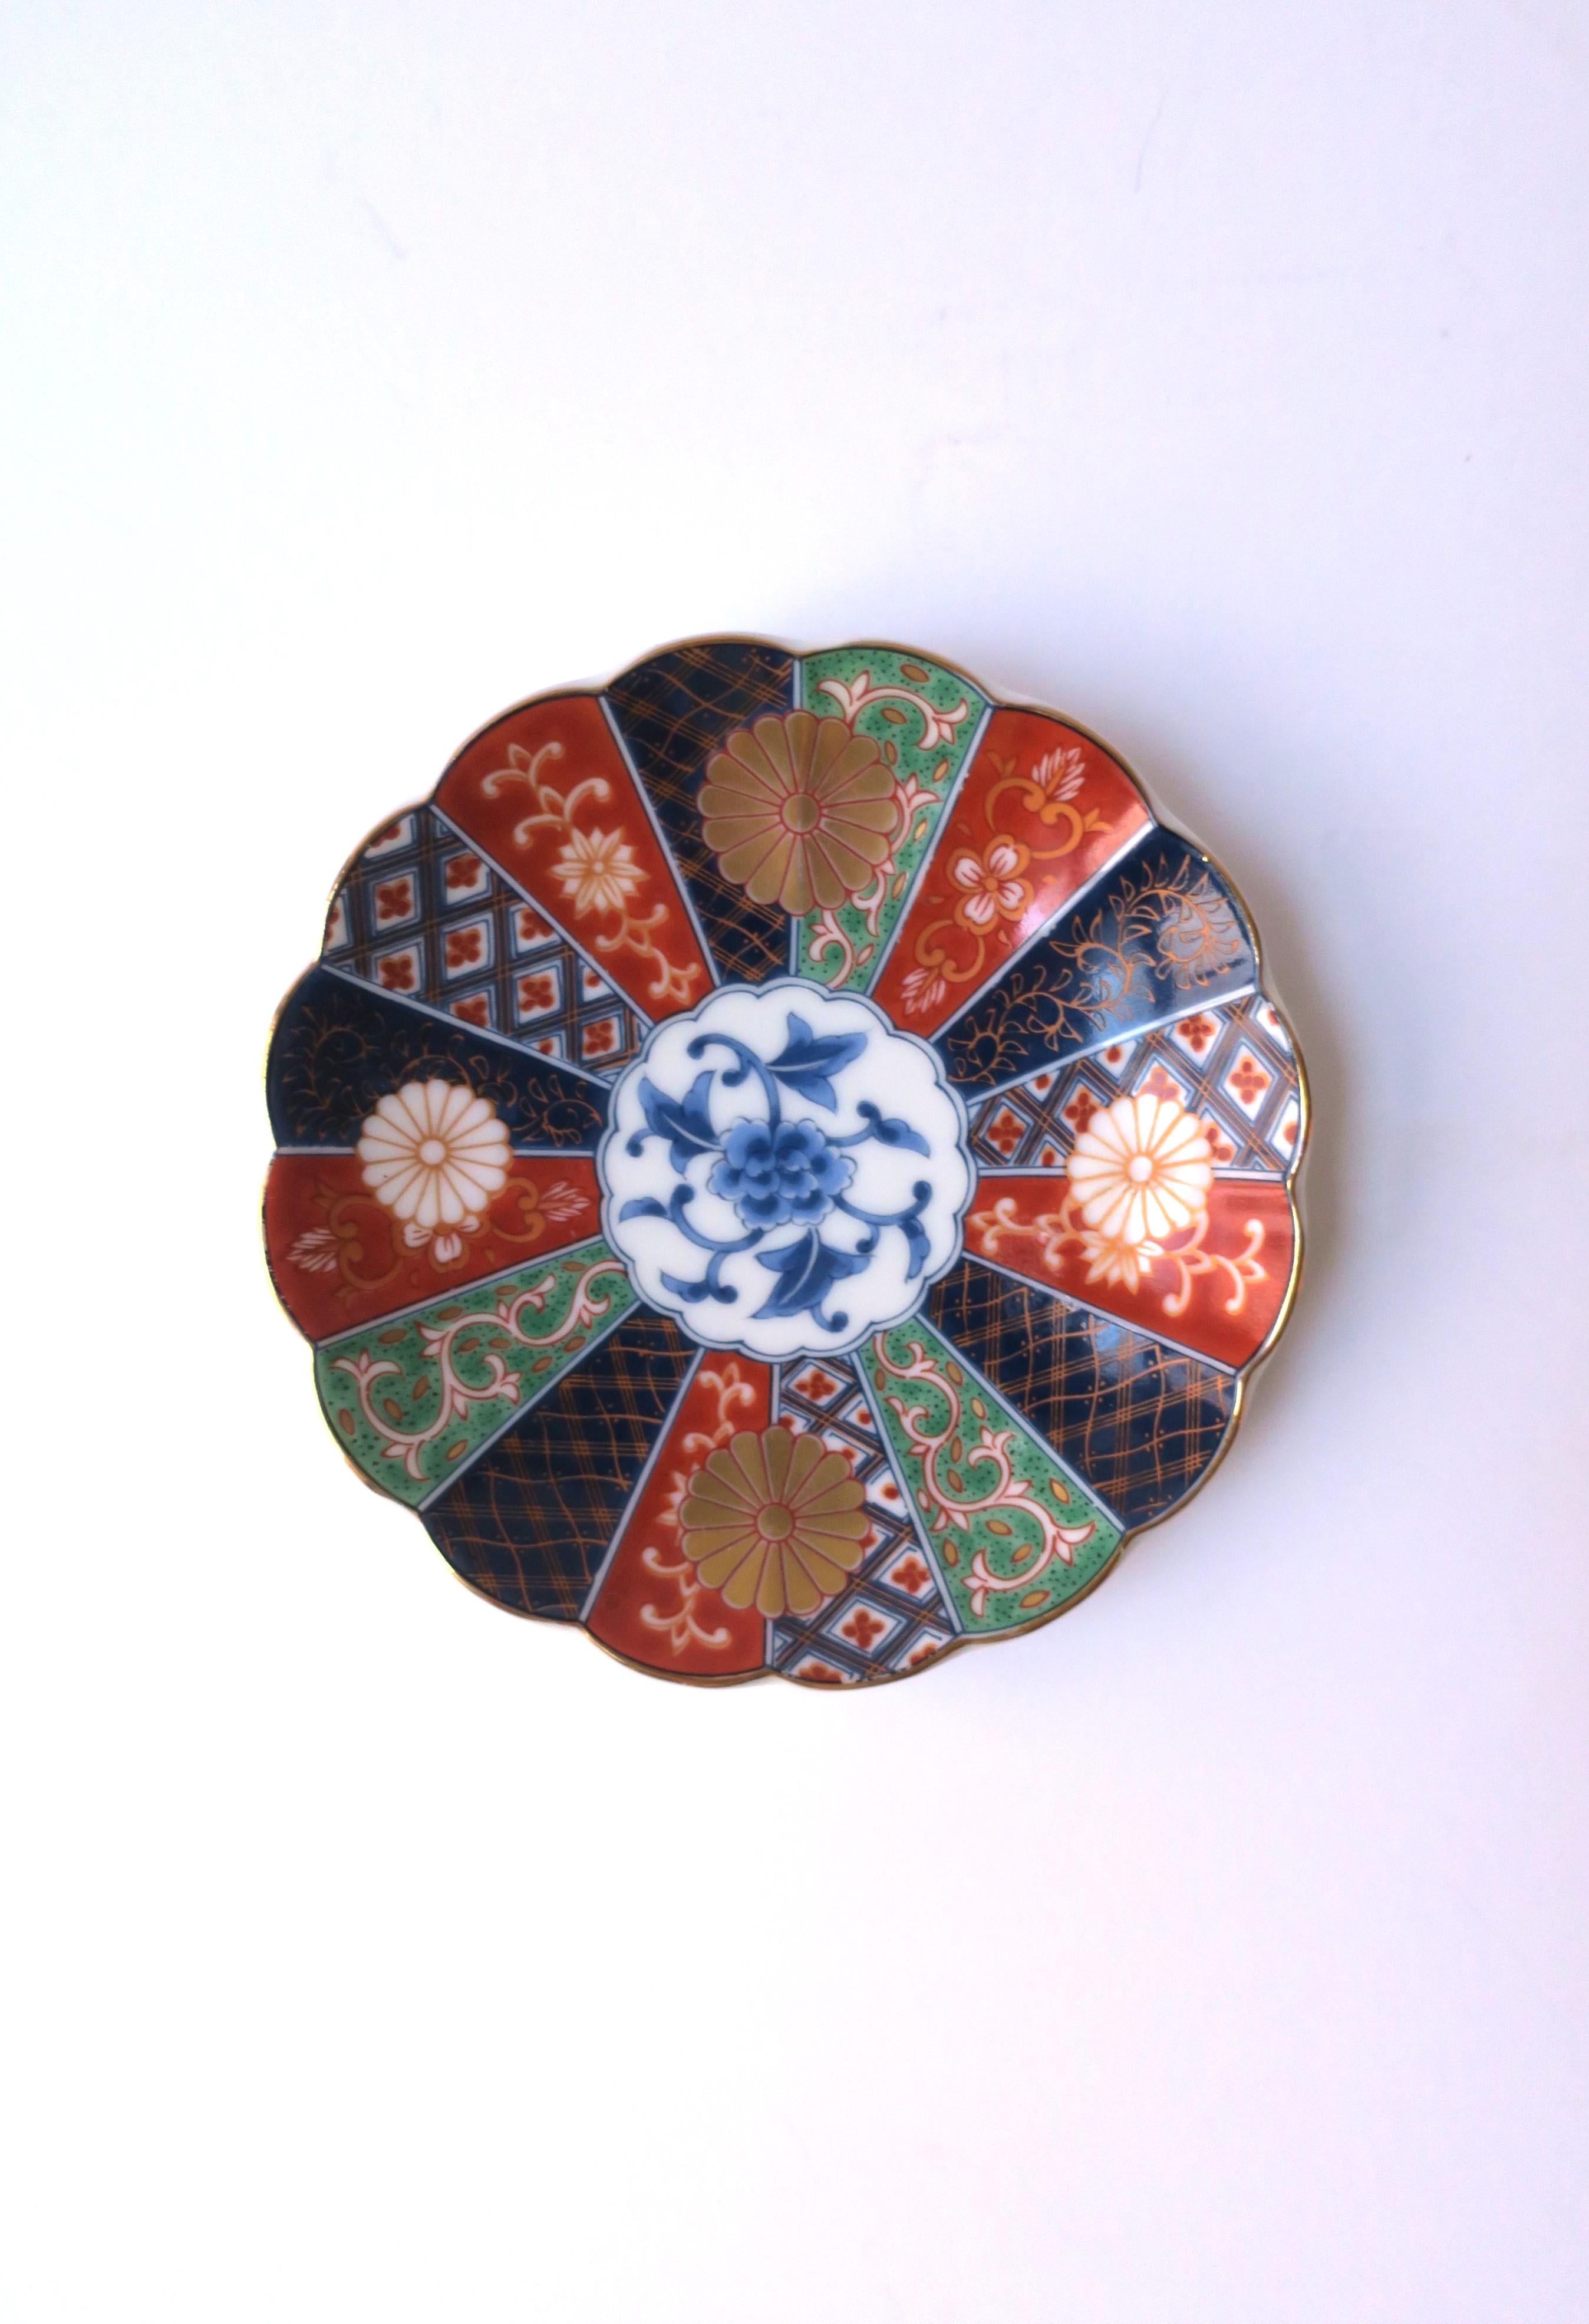 A beautiful round porcelain jewelry dish, hand-decorated, with a scalloped edge, in the Anglo-Japanese style, 1987, USA. Piece is made in both Japan and the United States. Colors include a white porcelain ground, blue, green, red burgundy, and gold.